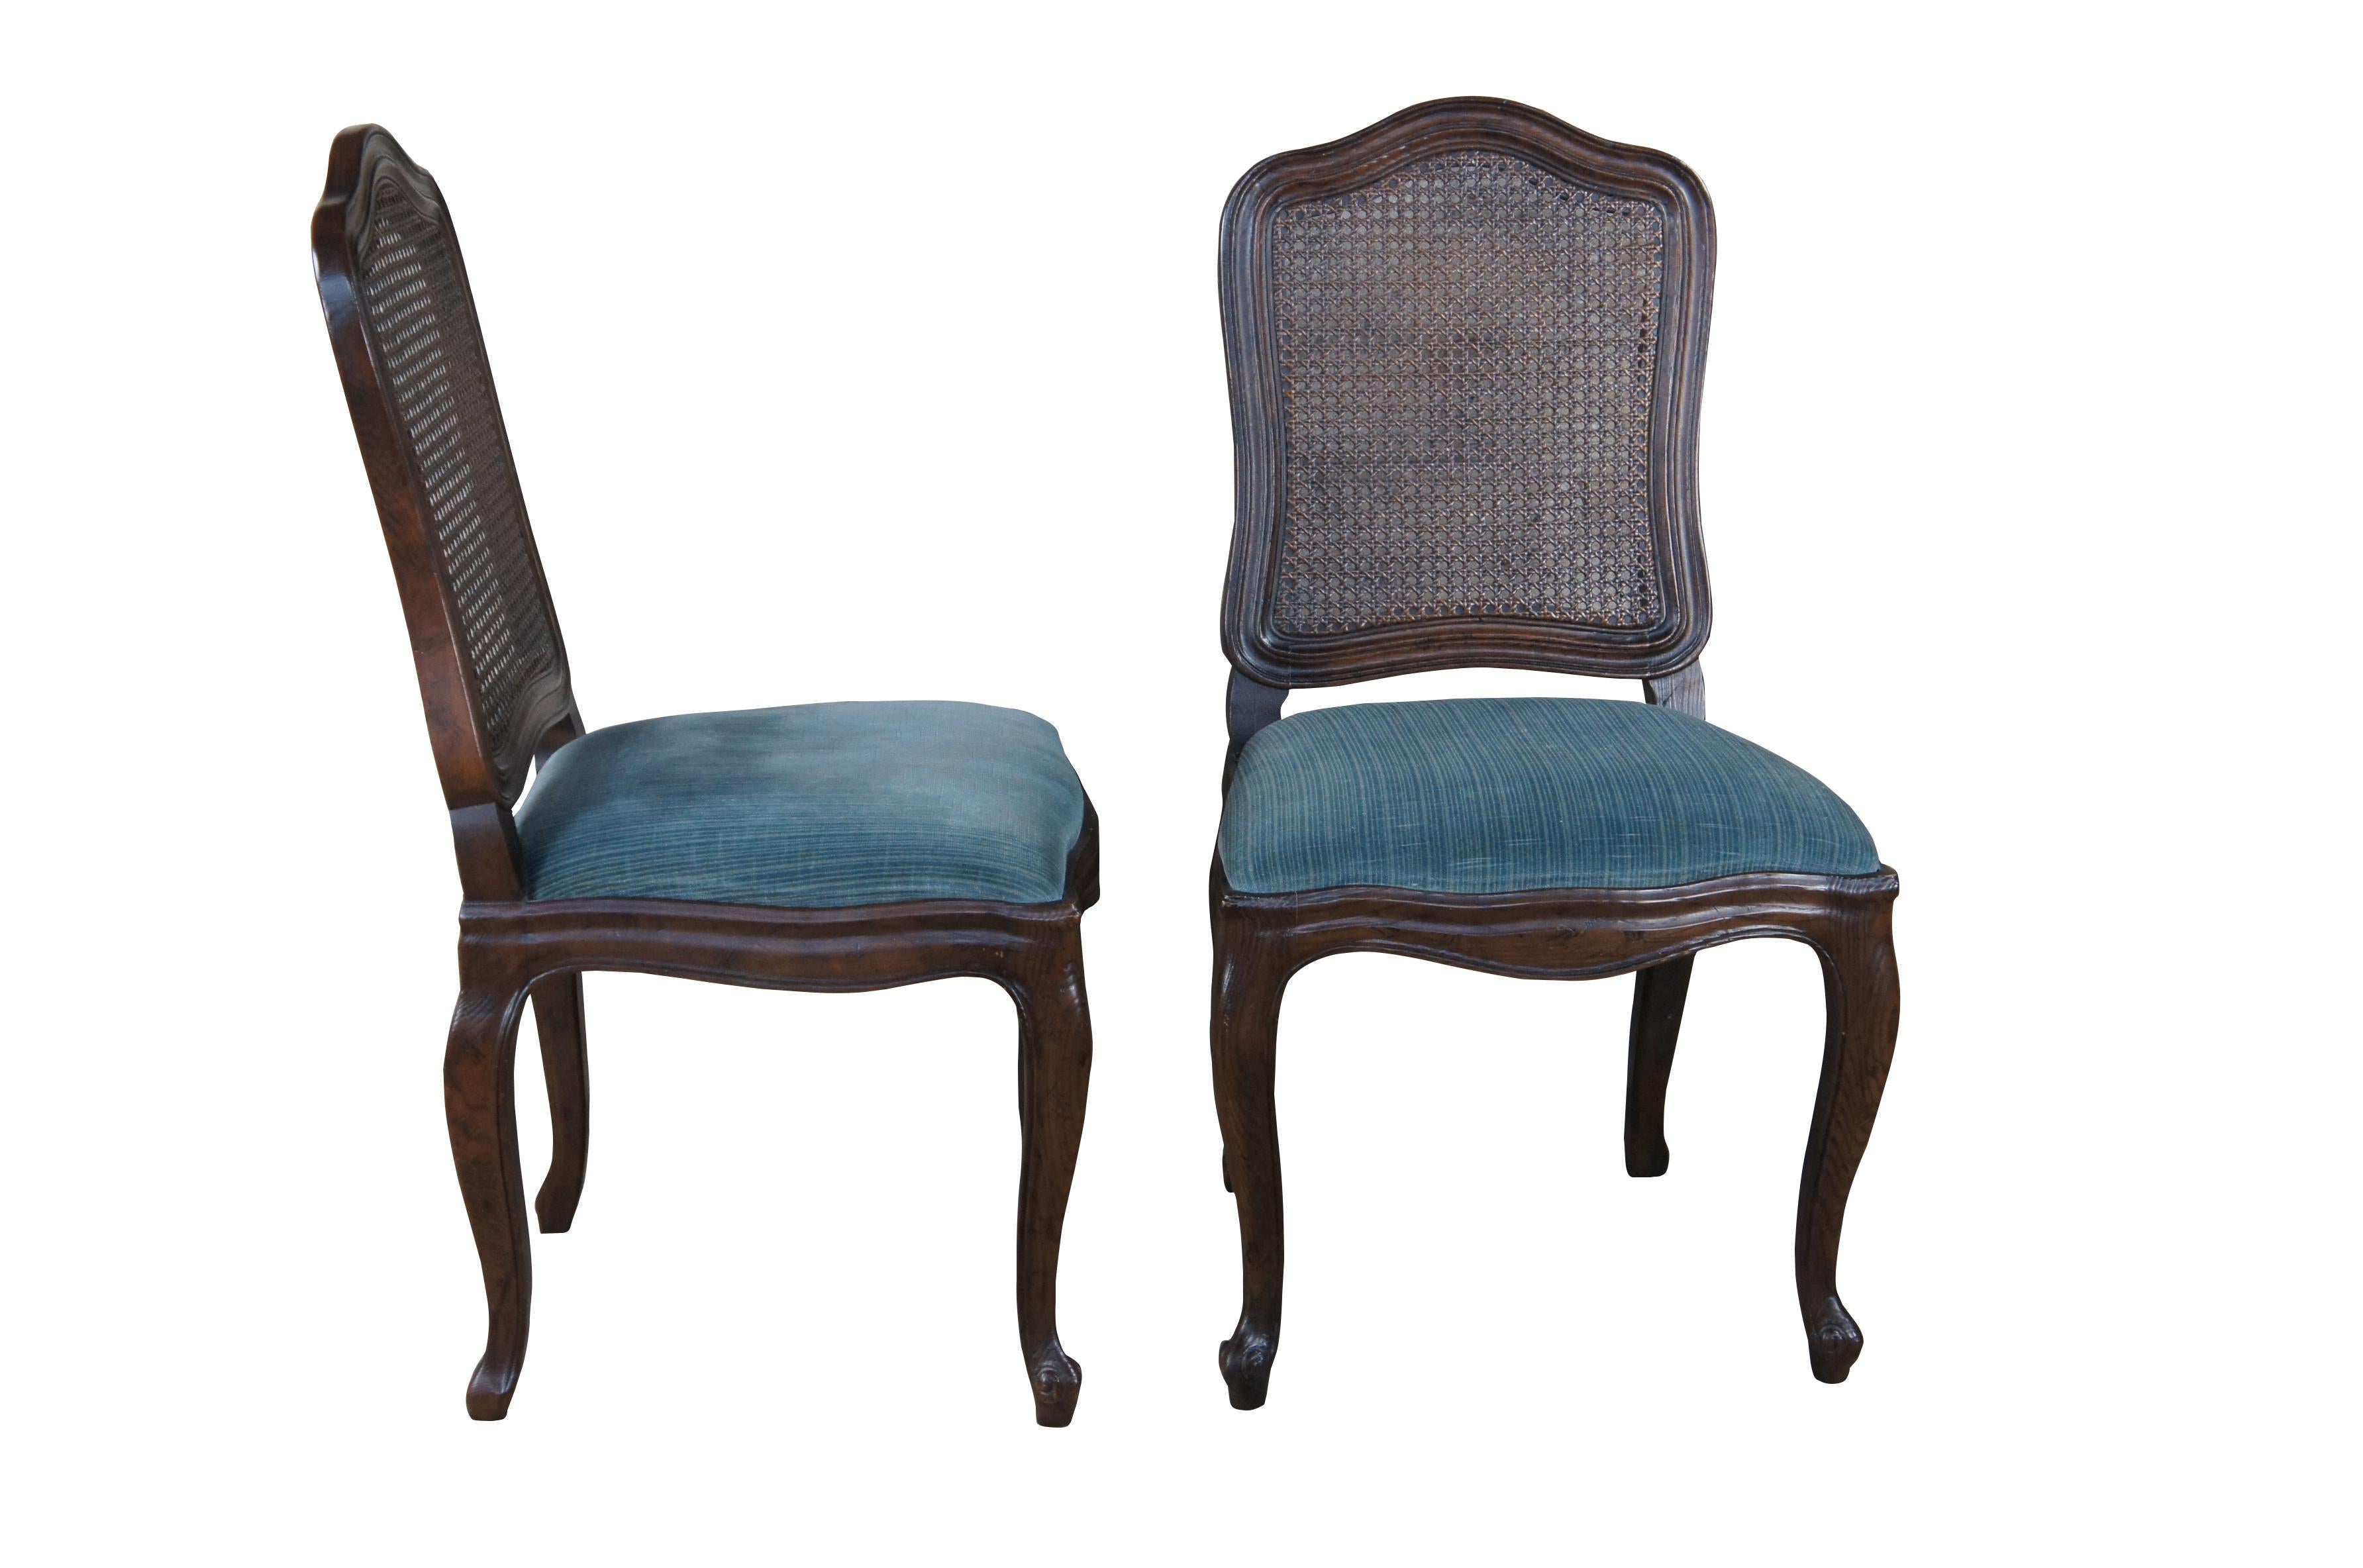 4 Henredon French Country Dining Side Chairs.  Part of the Four Centuries collection, circa 1970s.  Made from oak with a serpentine crest rail and cane back.  Features upholstered seats over cabriole legs and scolled feet.  

DIMENSIONS
20